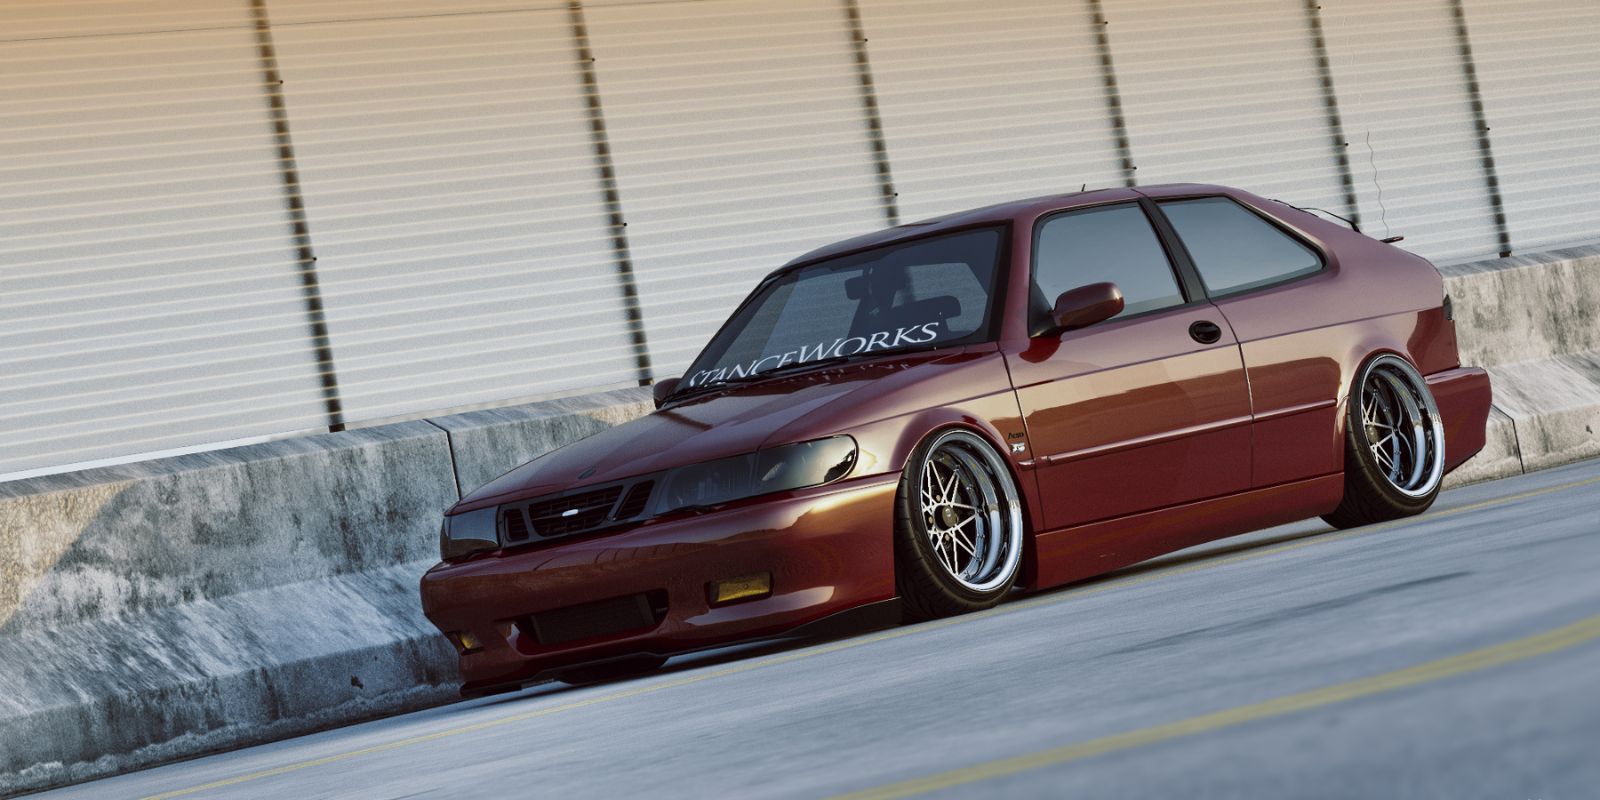 Stanced SAAB 9-3 Viggen with air suspension and JDM rims